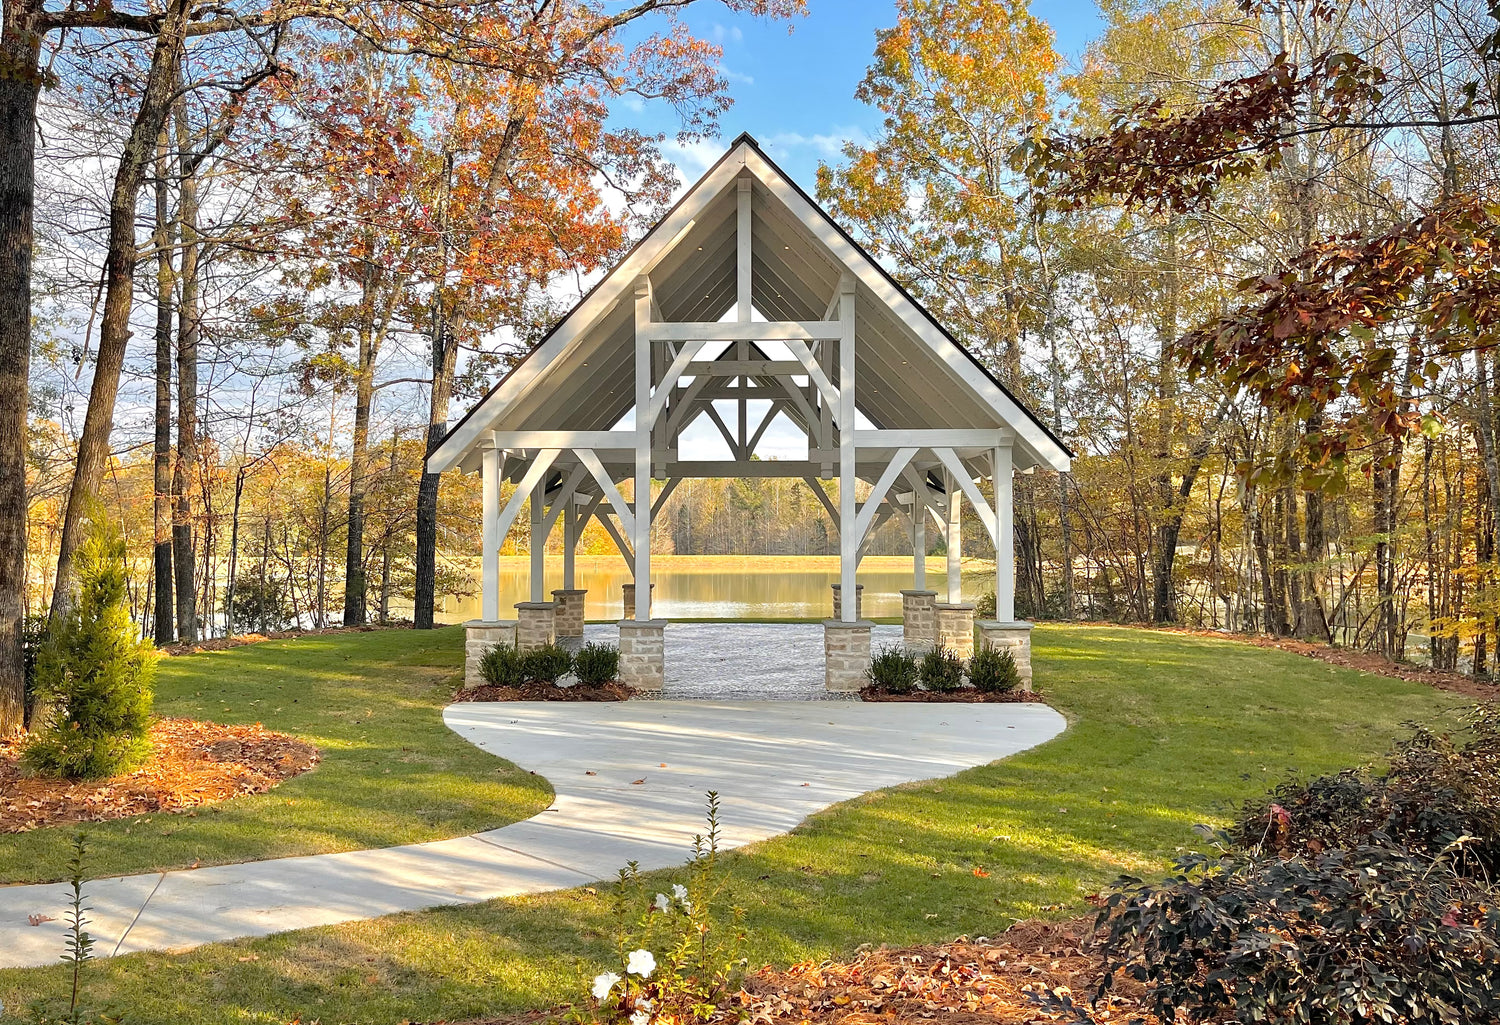 The chapel on the banks of lake helen is a stunning backdrop for a truly instagram-worthy wedding.